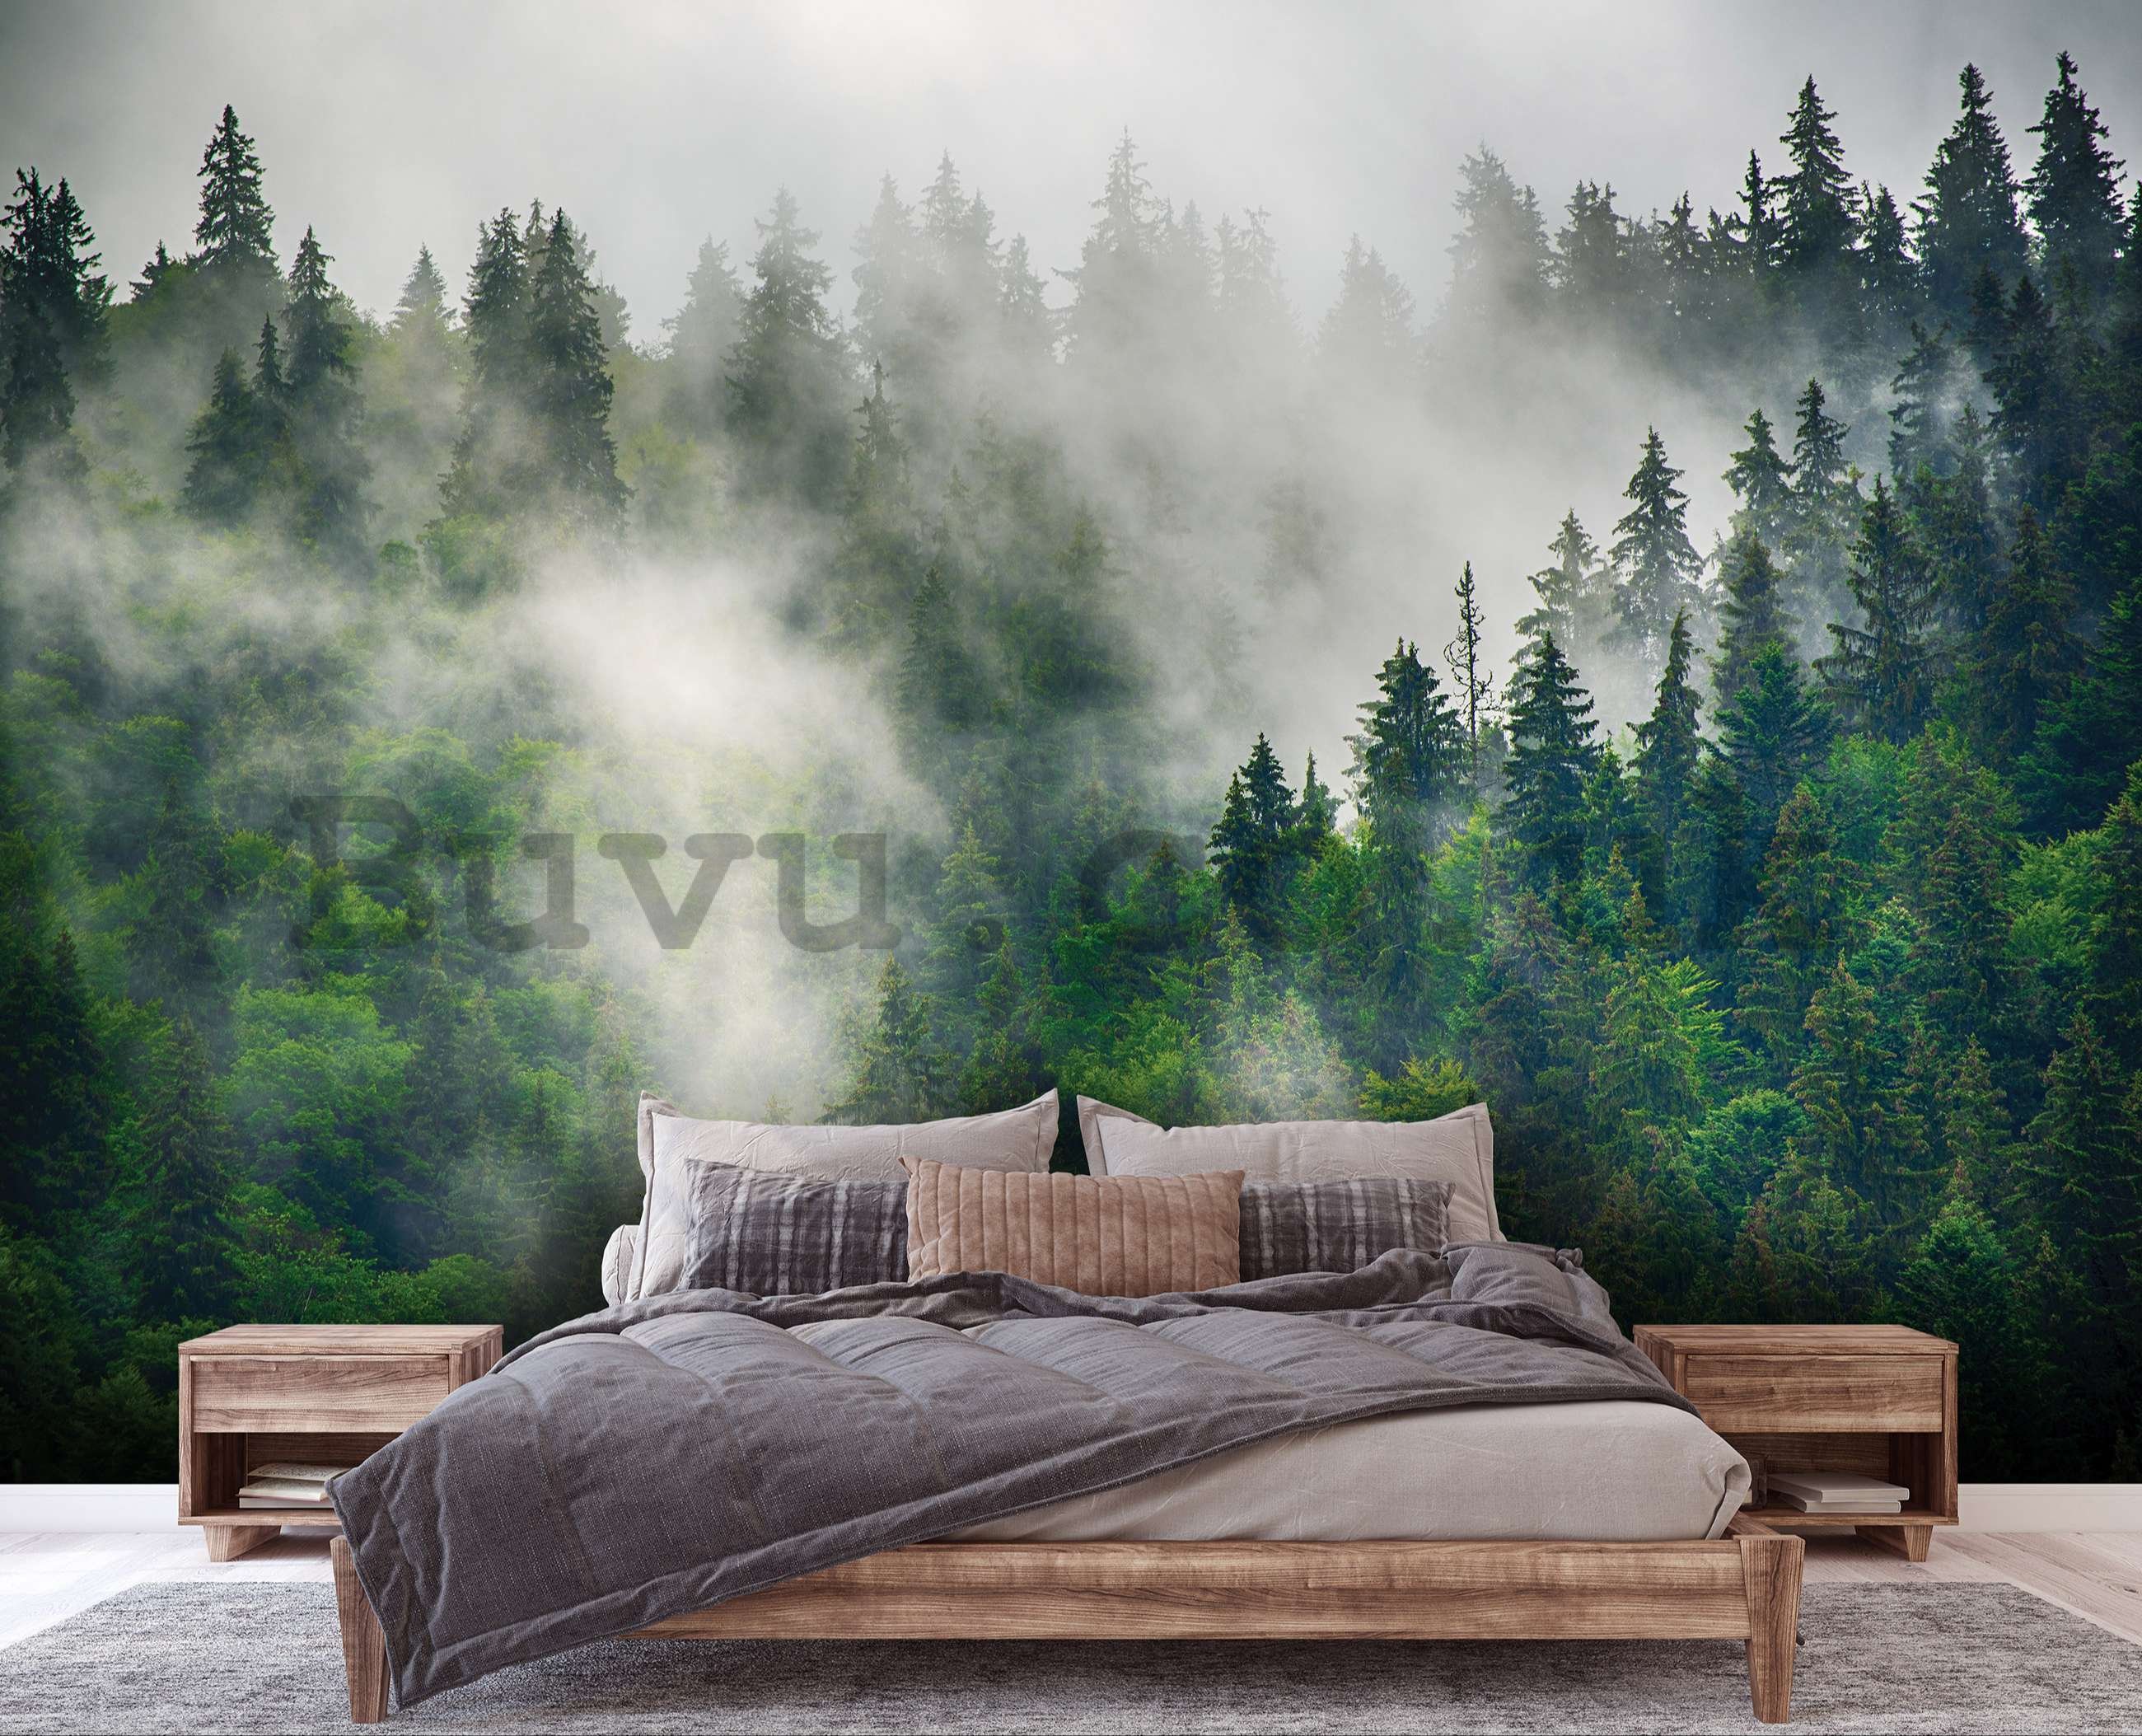 Wall mural vlies: Fog over the forest (5) - 416x254 cm